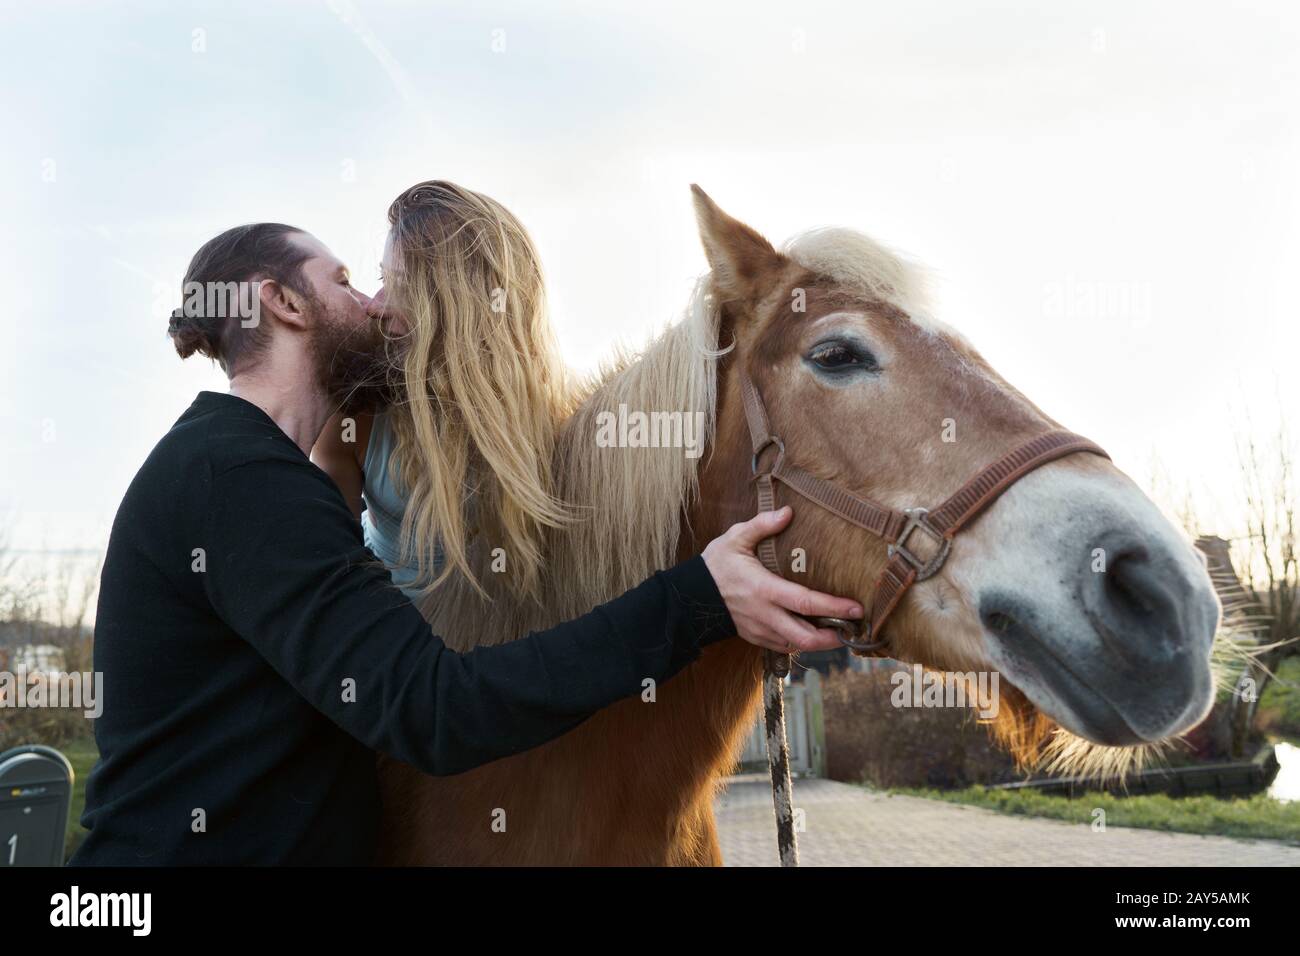 Loving couple man and woman Kissing Riding a Horse Stock Photo